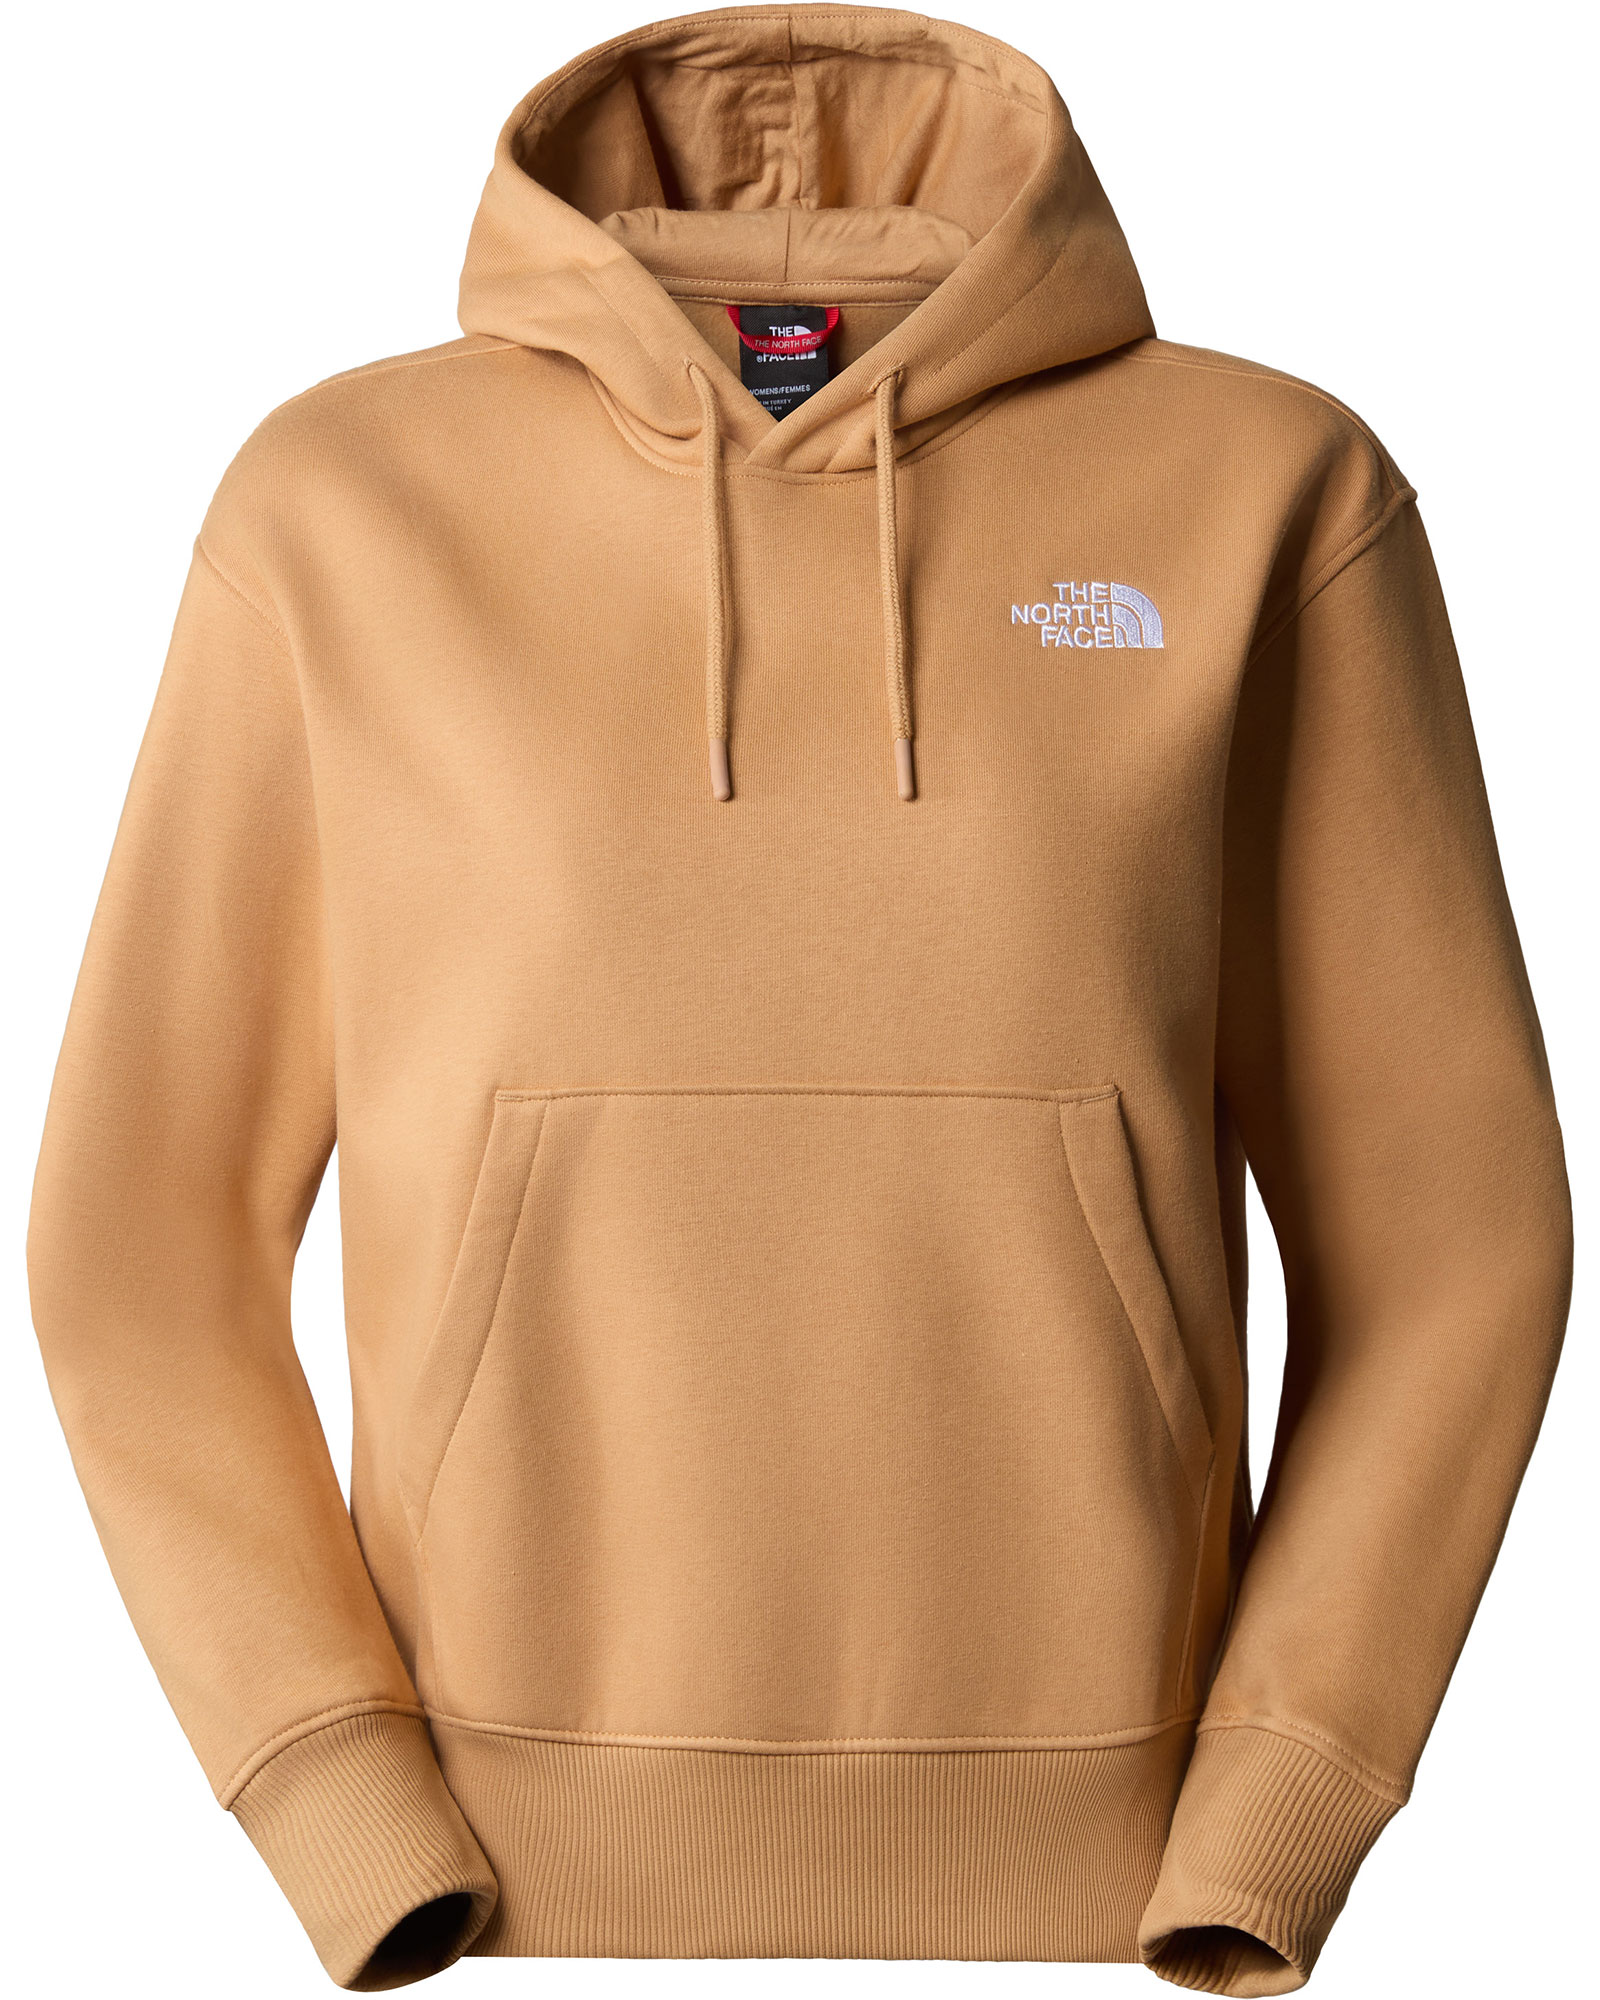 The North Face Women’s Essential Hoodie - Almond Butter XS